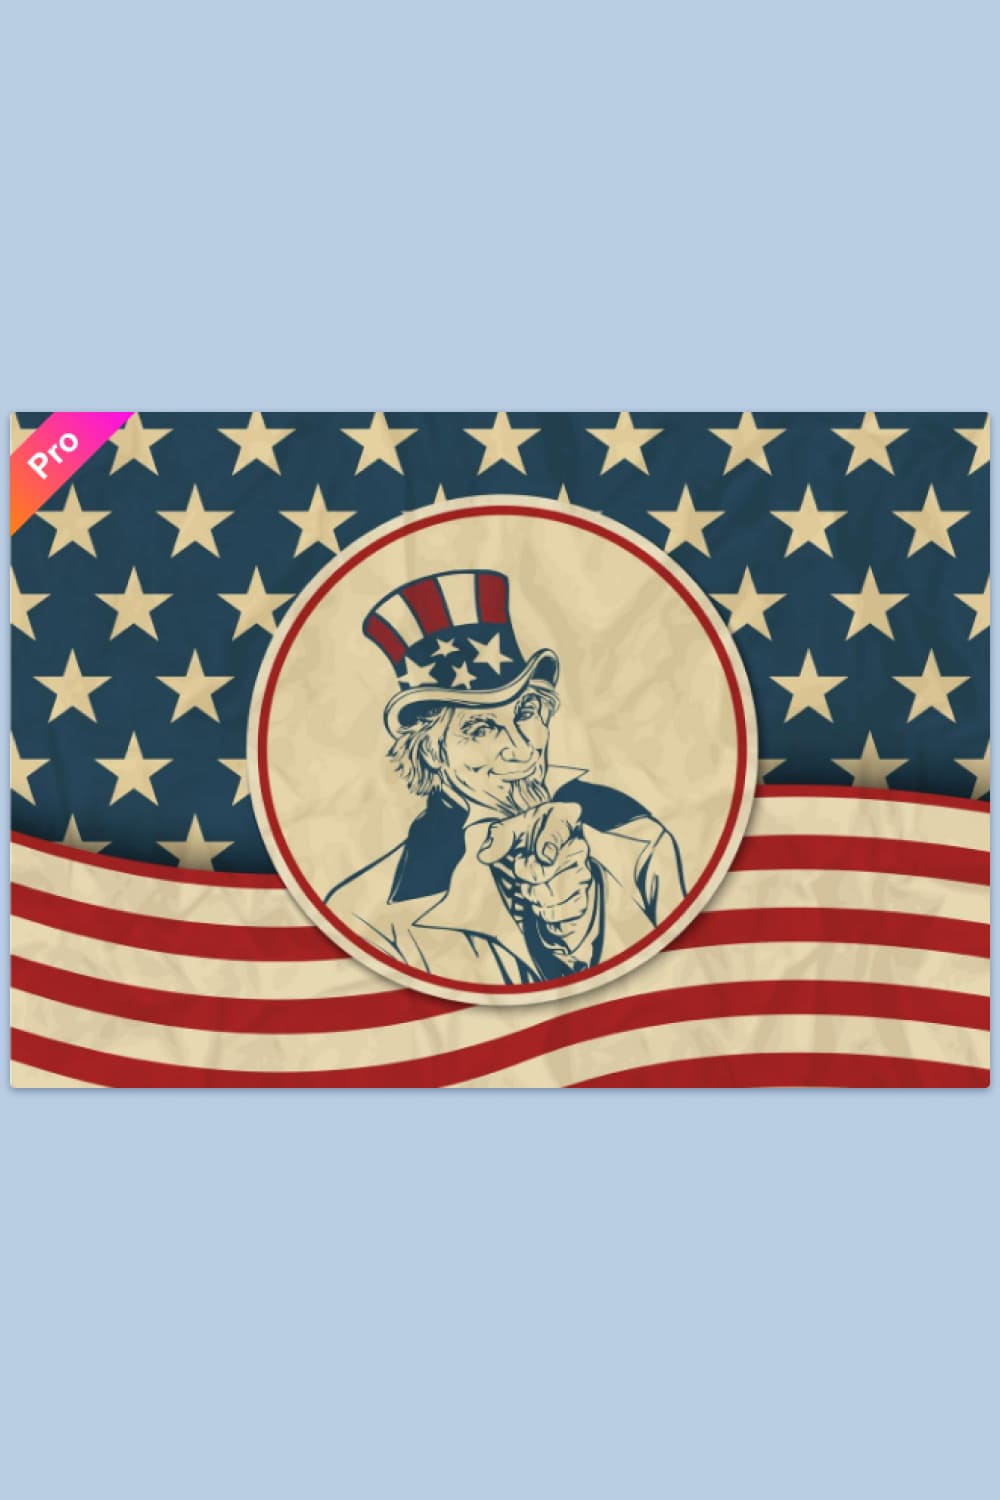 Uncle Sam in vintage style on the background of the American flag.